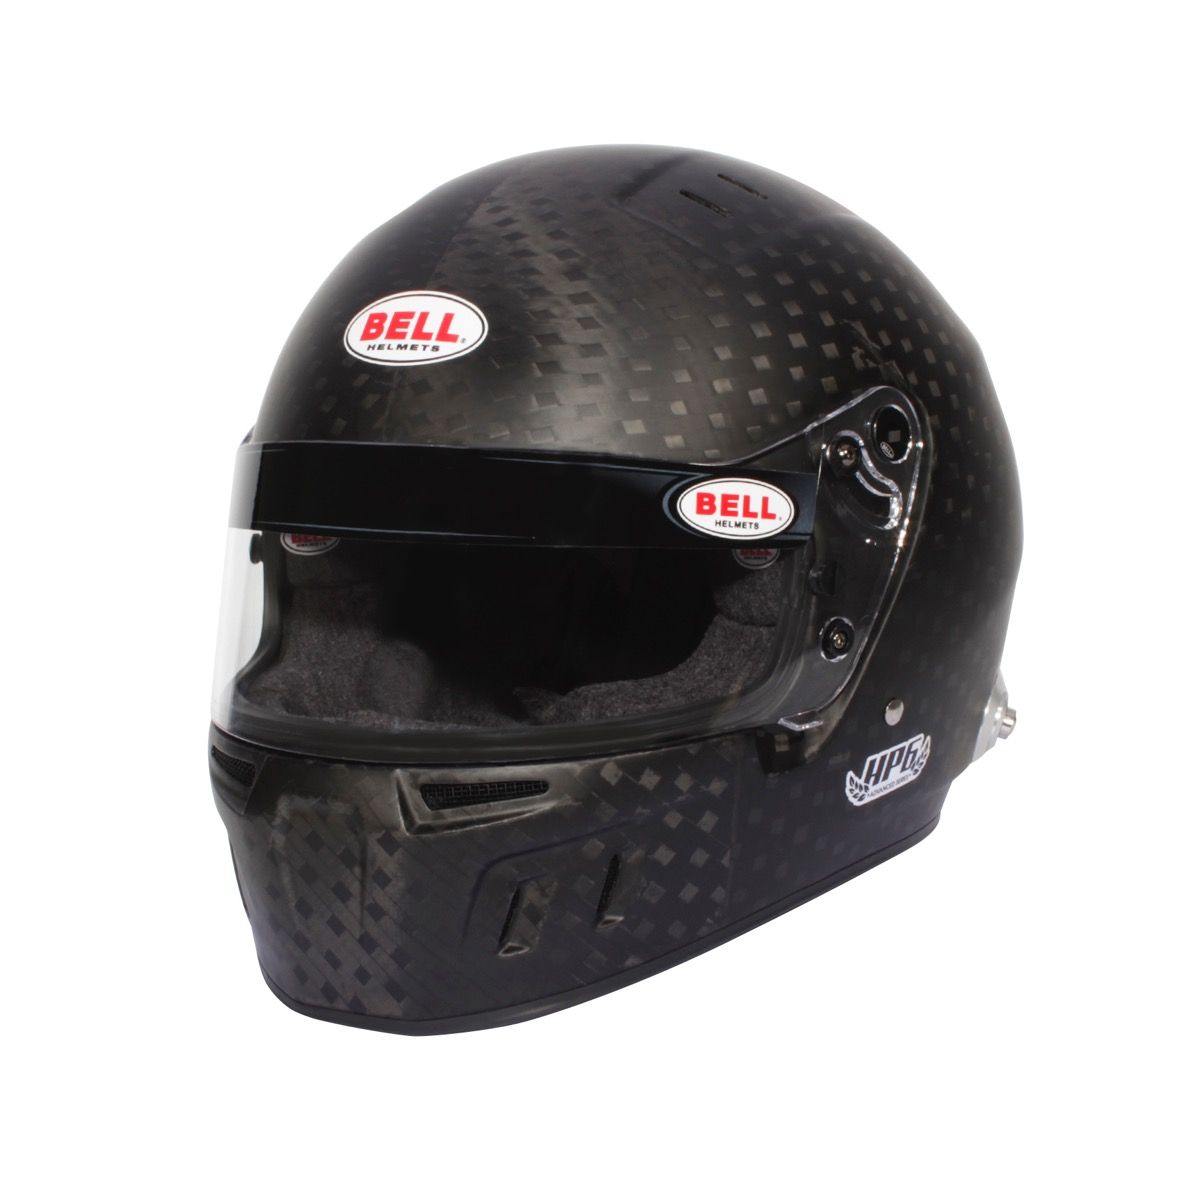 Bell HP6 RD-4C/EC 8860-2018 Carbon Fiber Helmet - Front View Image  Gain a detailed look at the Bell HP6 8860-2018 Carbon Fiber Helmet from the front in this image, showcasing its advanced design.